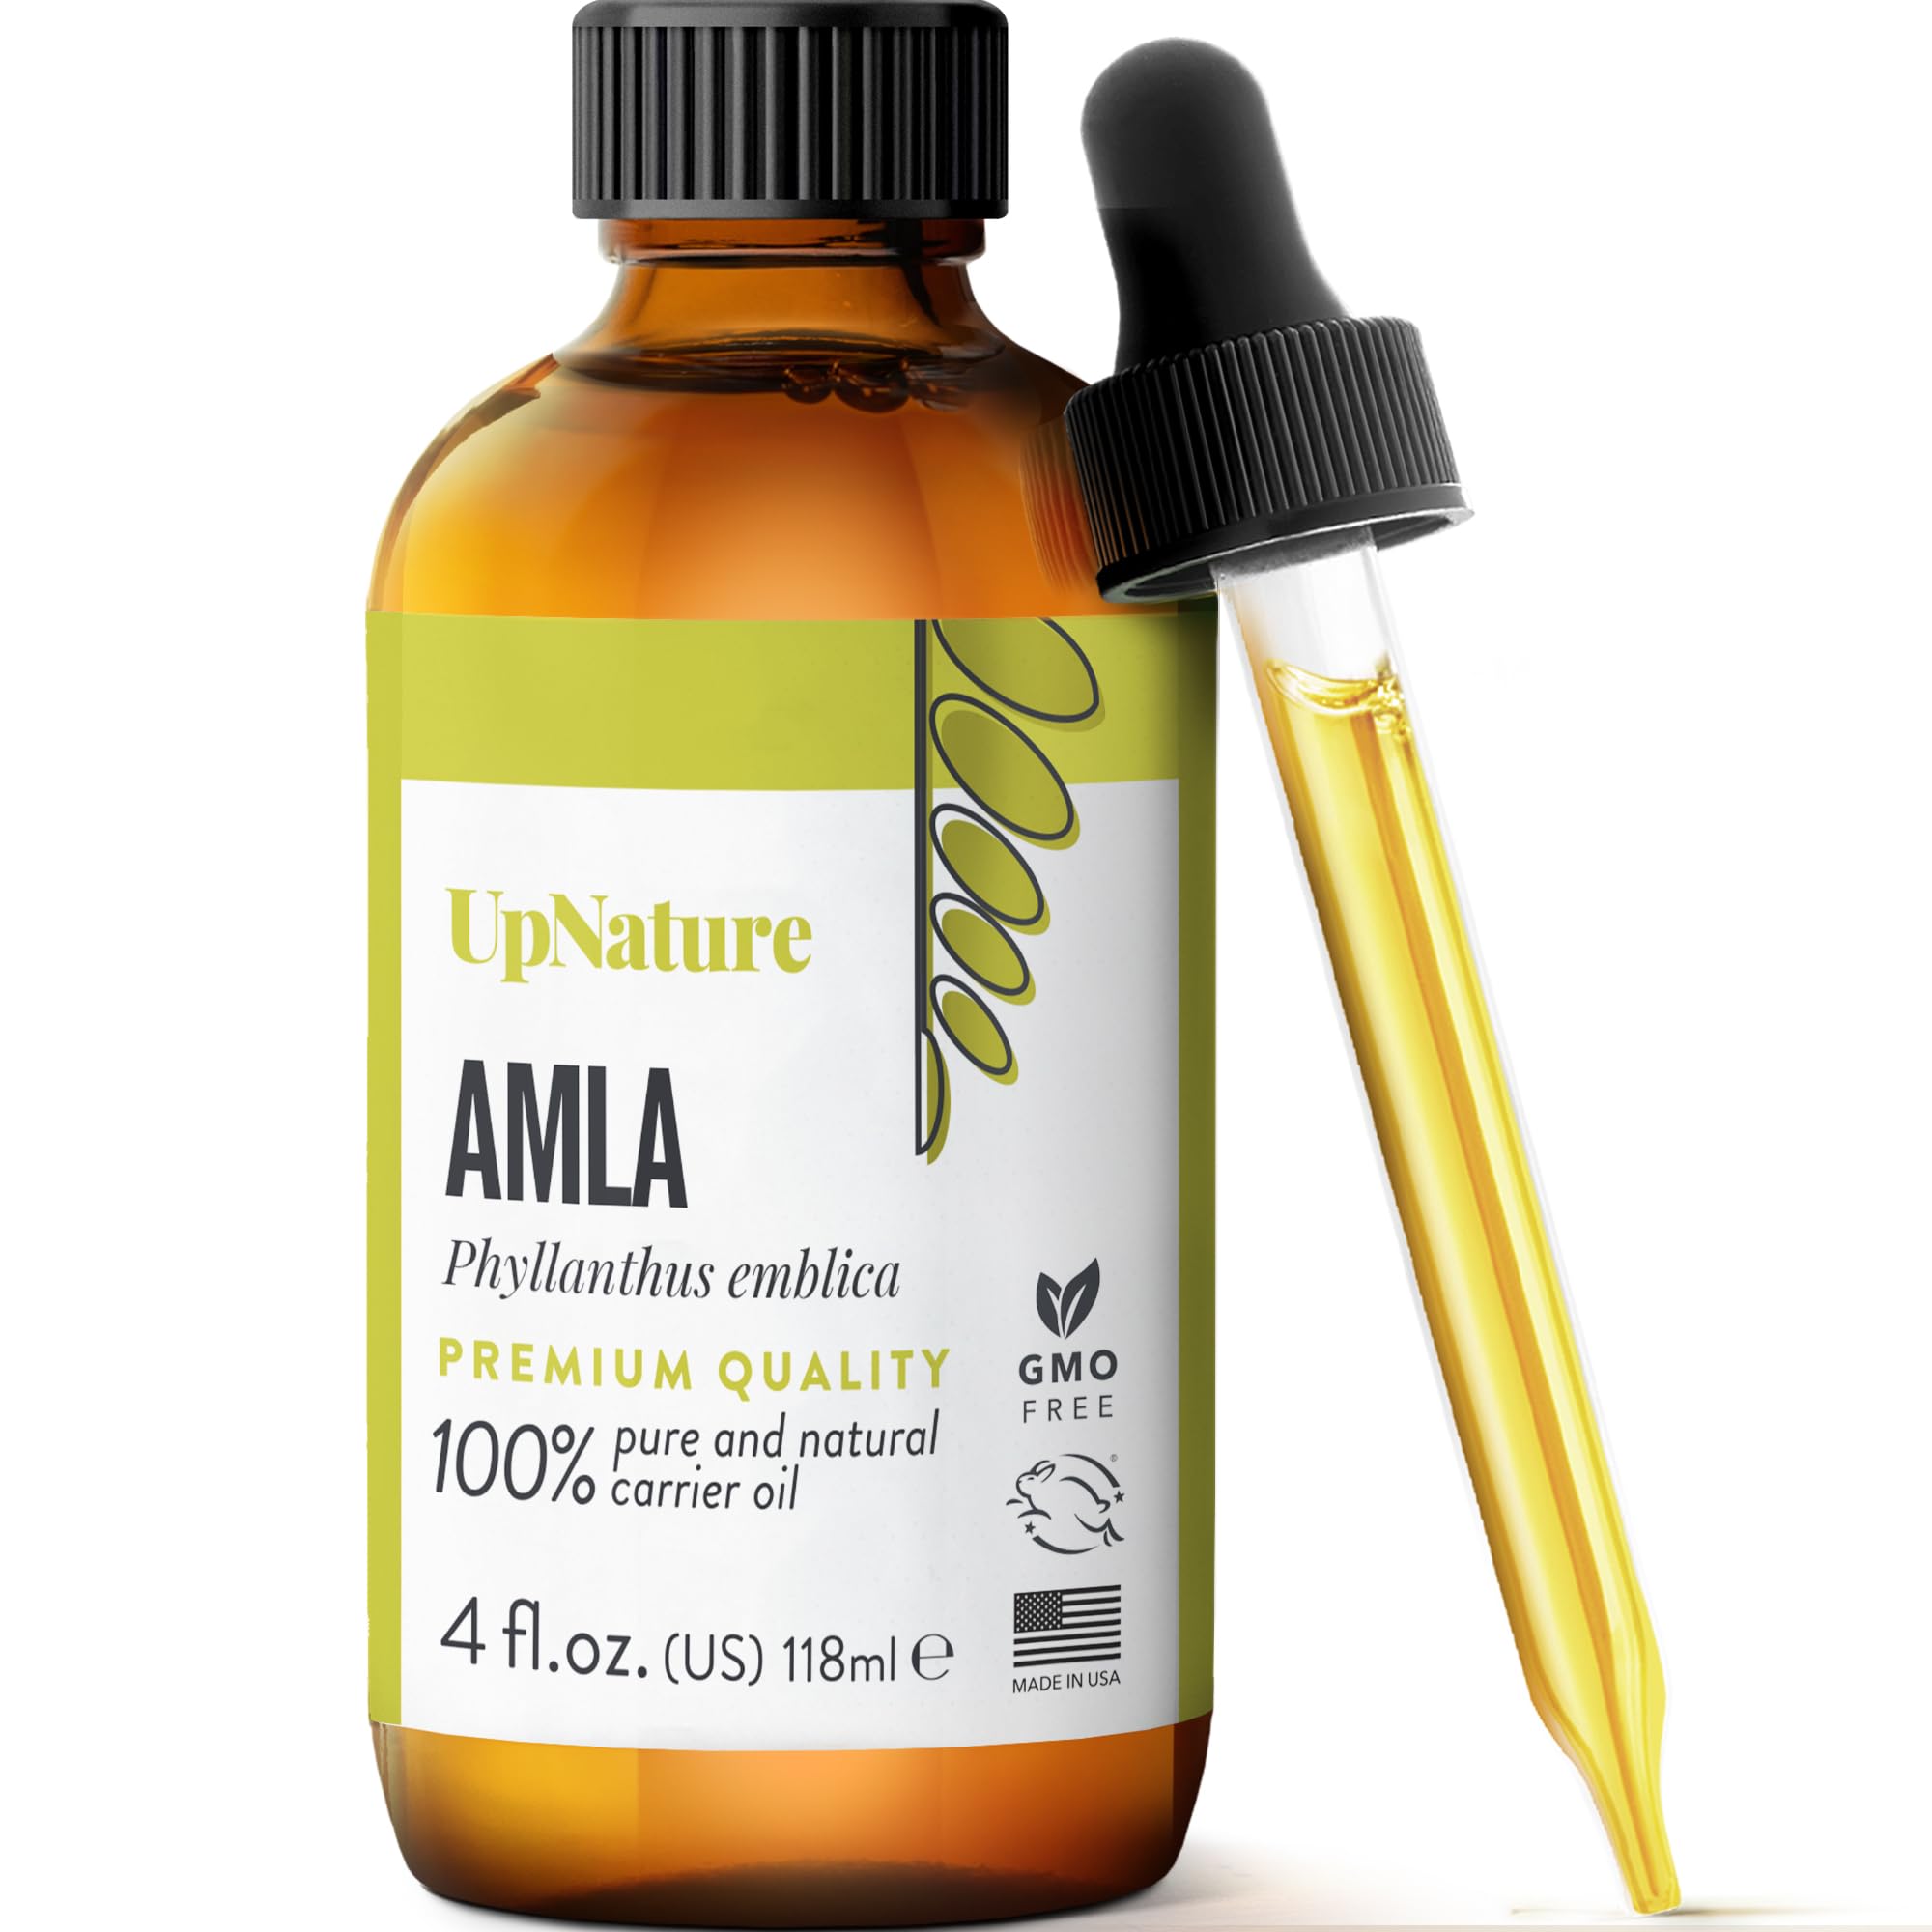 UpNature Amla Oil 4oz   Amla Hair Oil - Promotes Hair Growth, Great for Itchy Scalp, Prevents Dandruff - Therapeutic Grade Essential Oil for Hair, Non-GMO